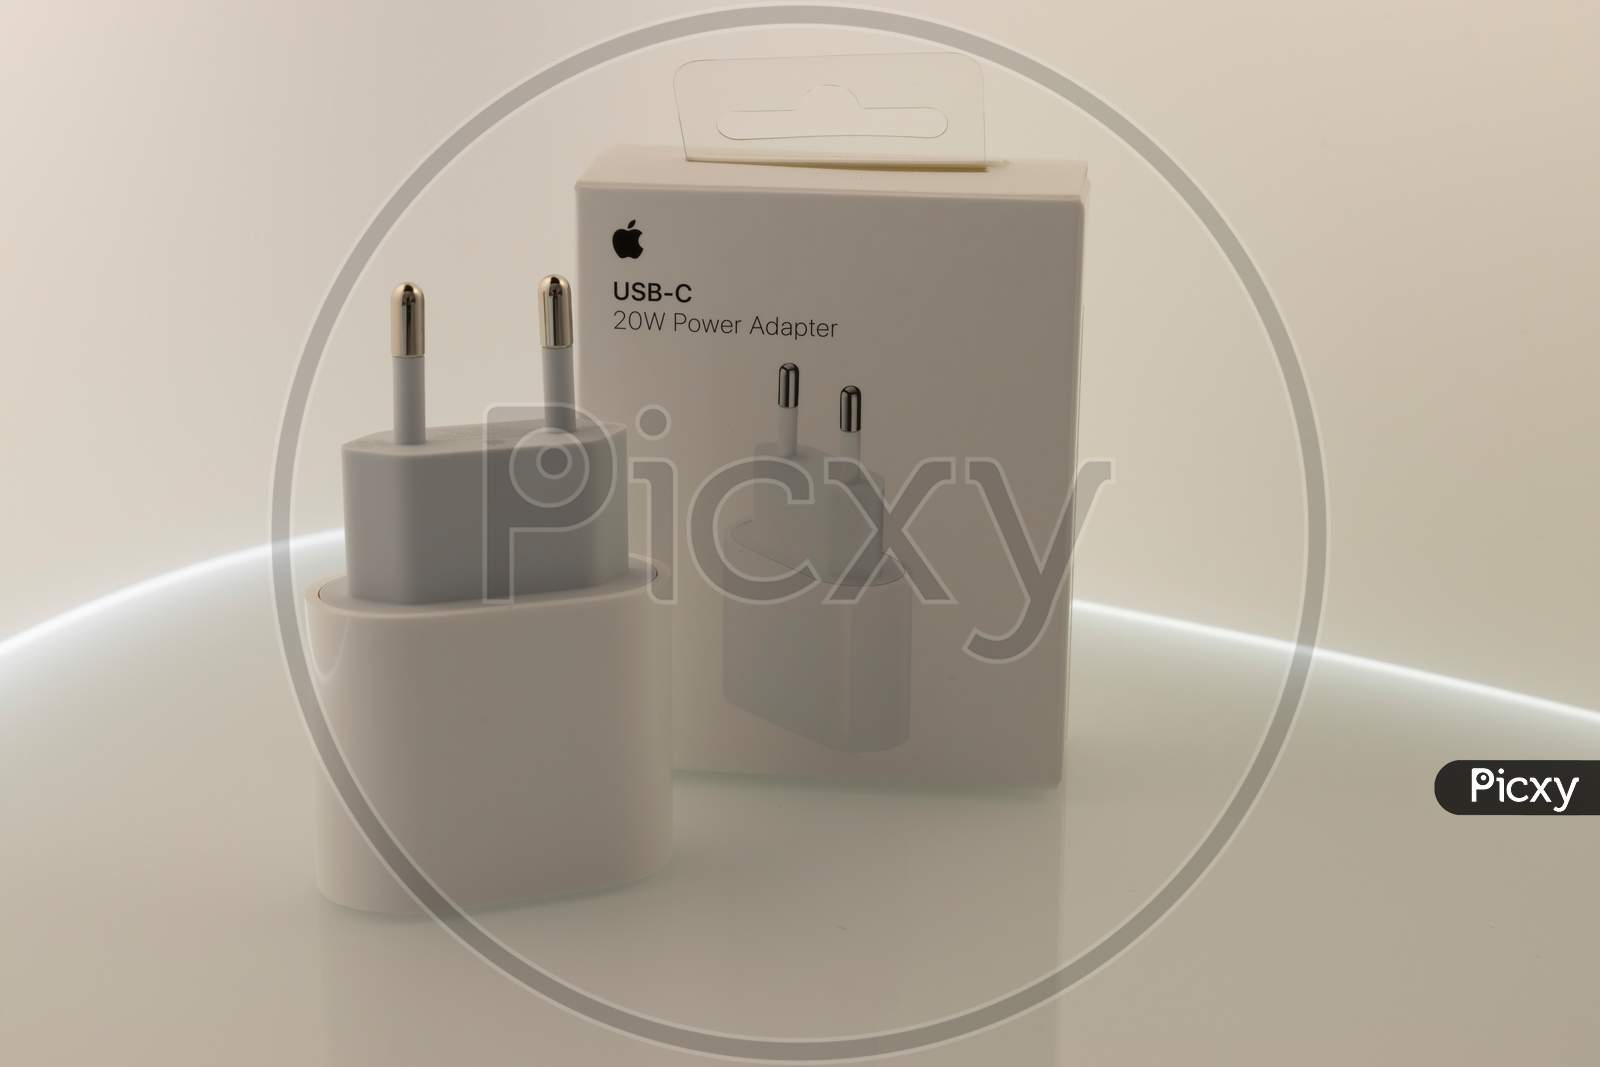 Frankfurt, Germany - November 13th 2020: A german photographer bought the new iPhone 12 Pro Max with MagSafe accessories as the charger, taking pictures of the unboxing.